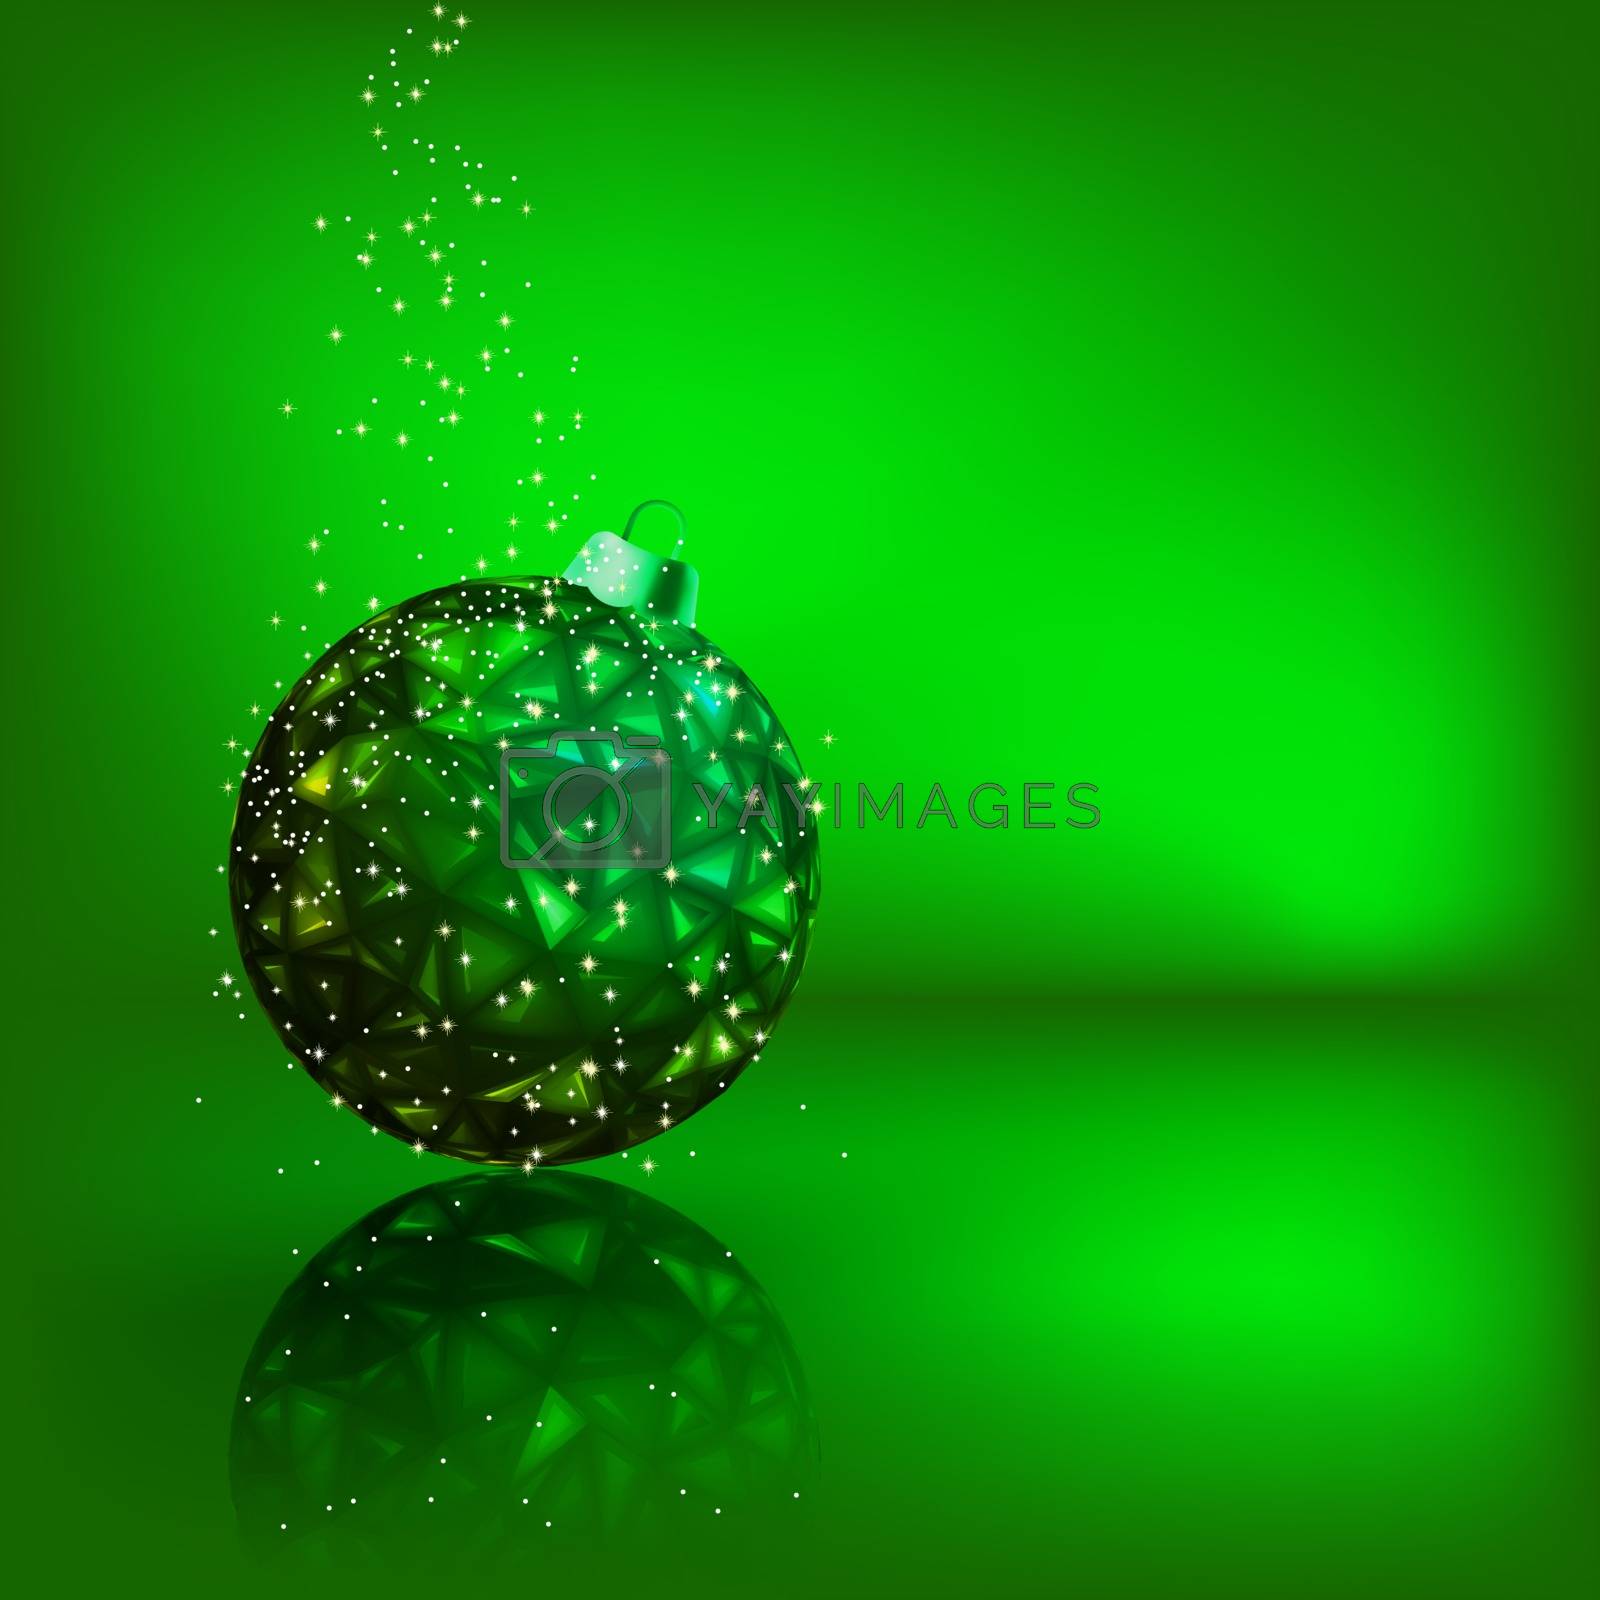 Royalty free image of Background with stars and Christmas ball. EPS 8 by Petrov_Vladimir